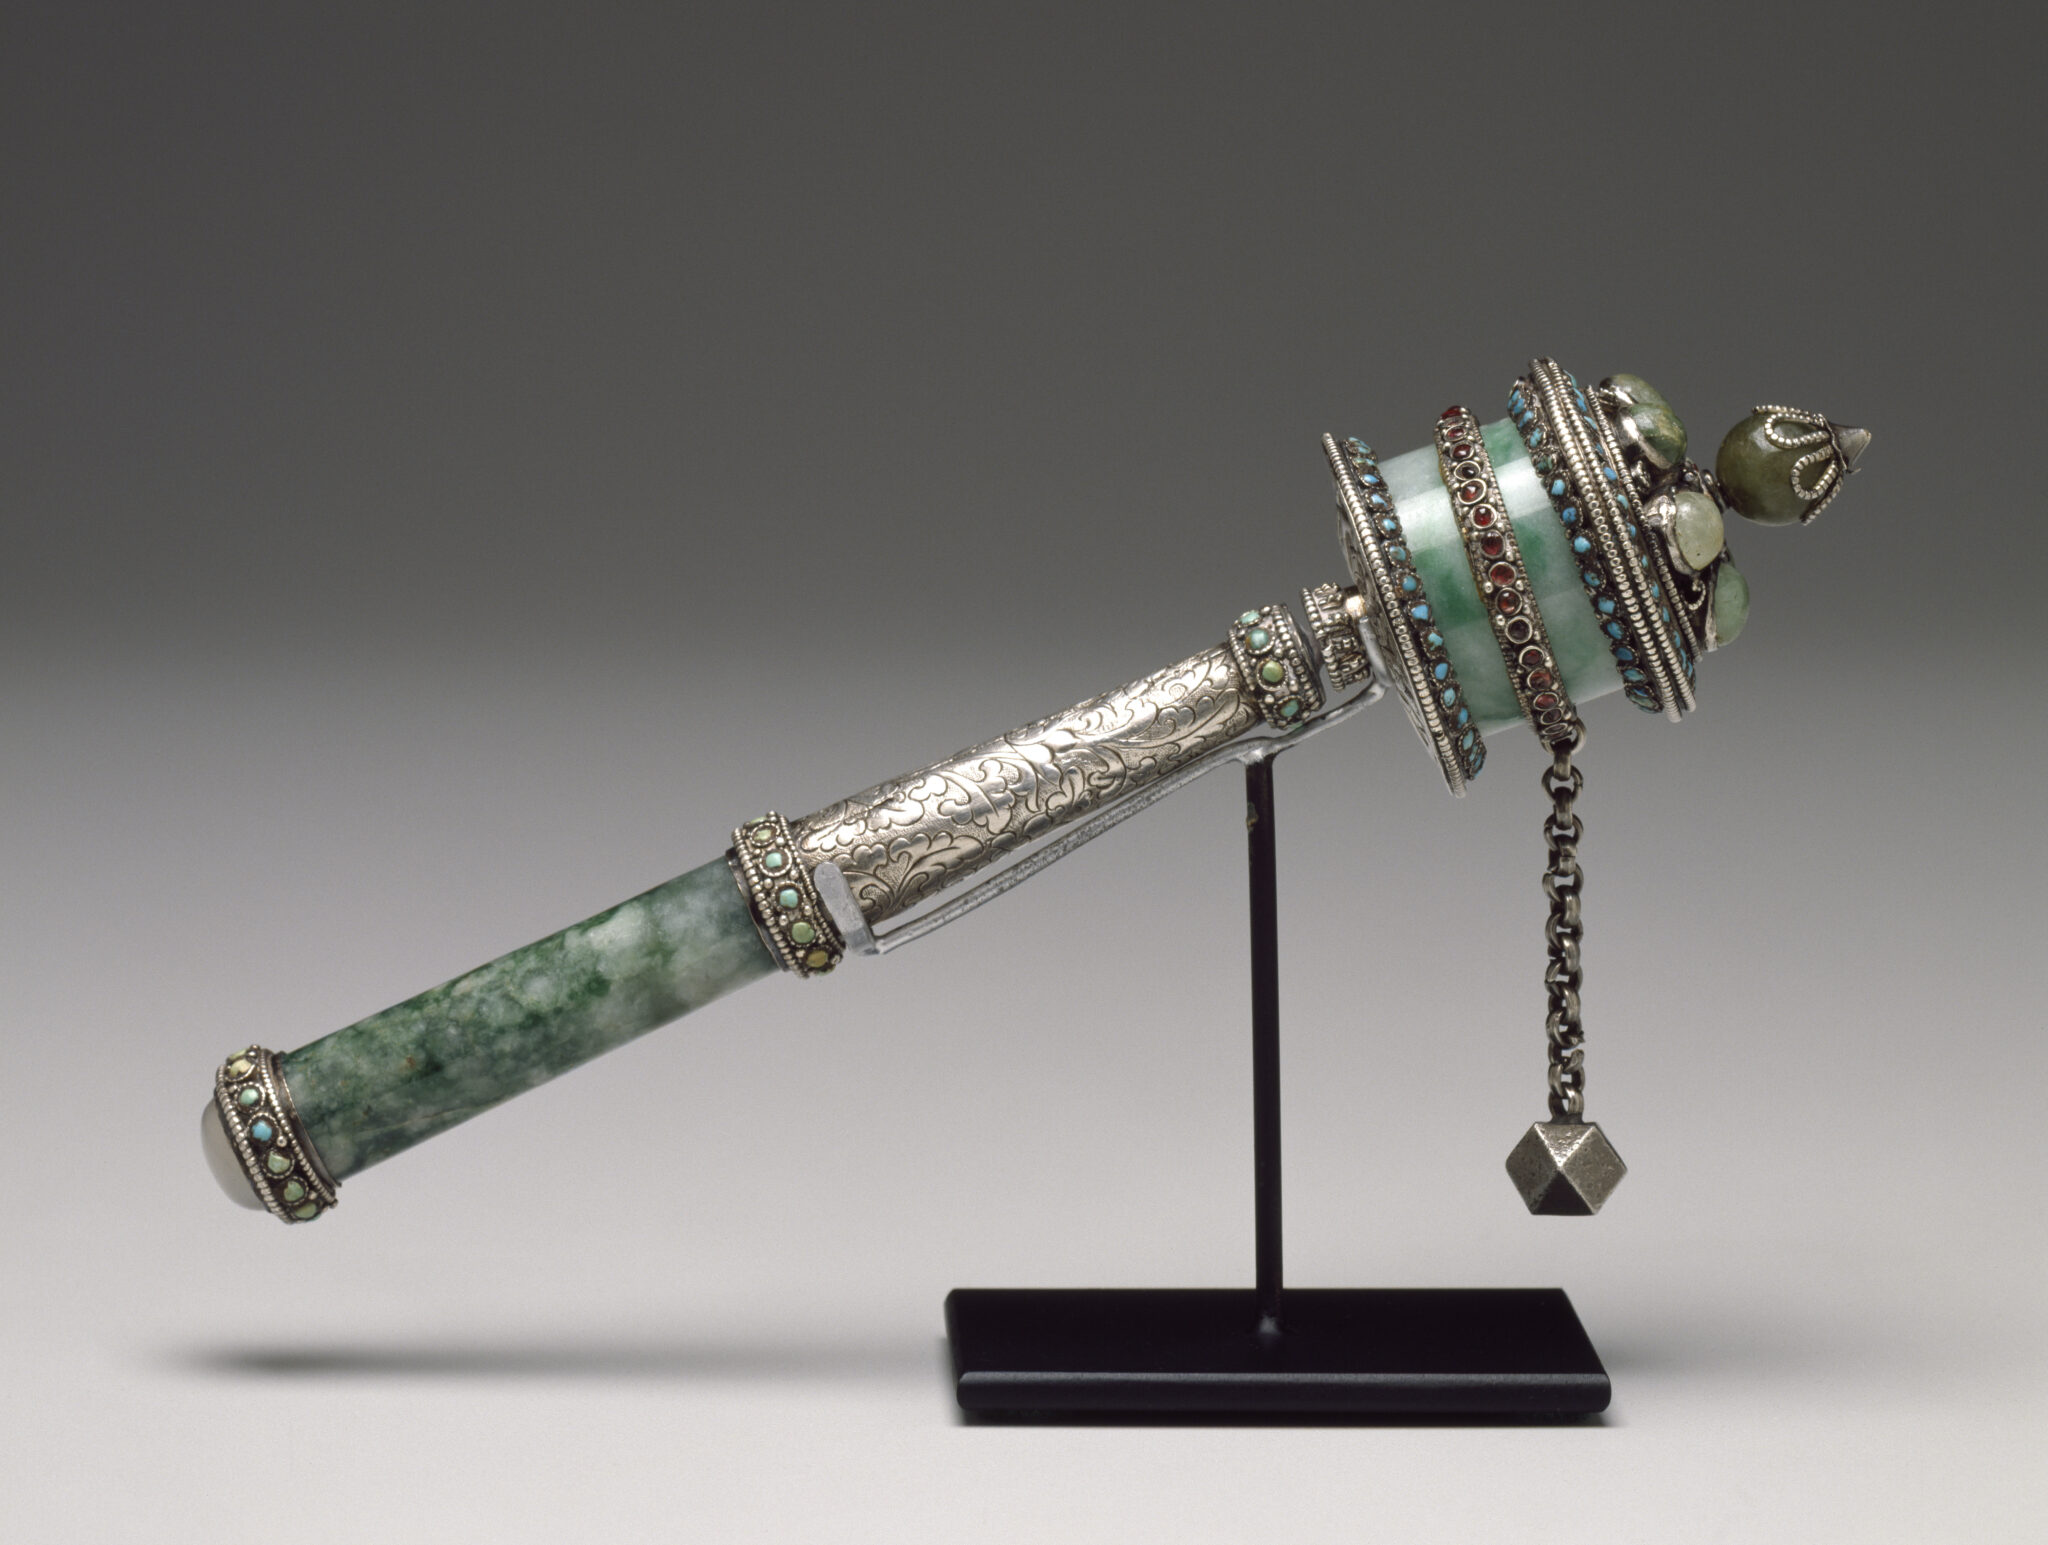 Silver religious implement with blue-green jade accents: ball and chain attached to rotating cylinder mounted on handle